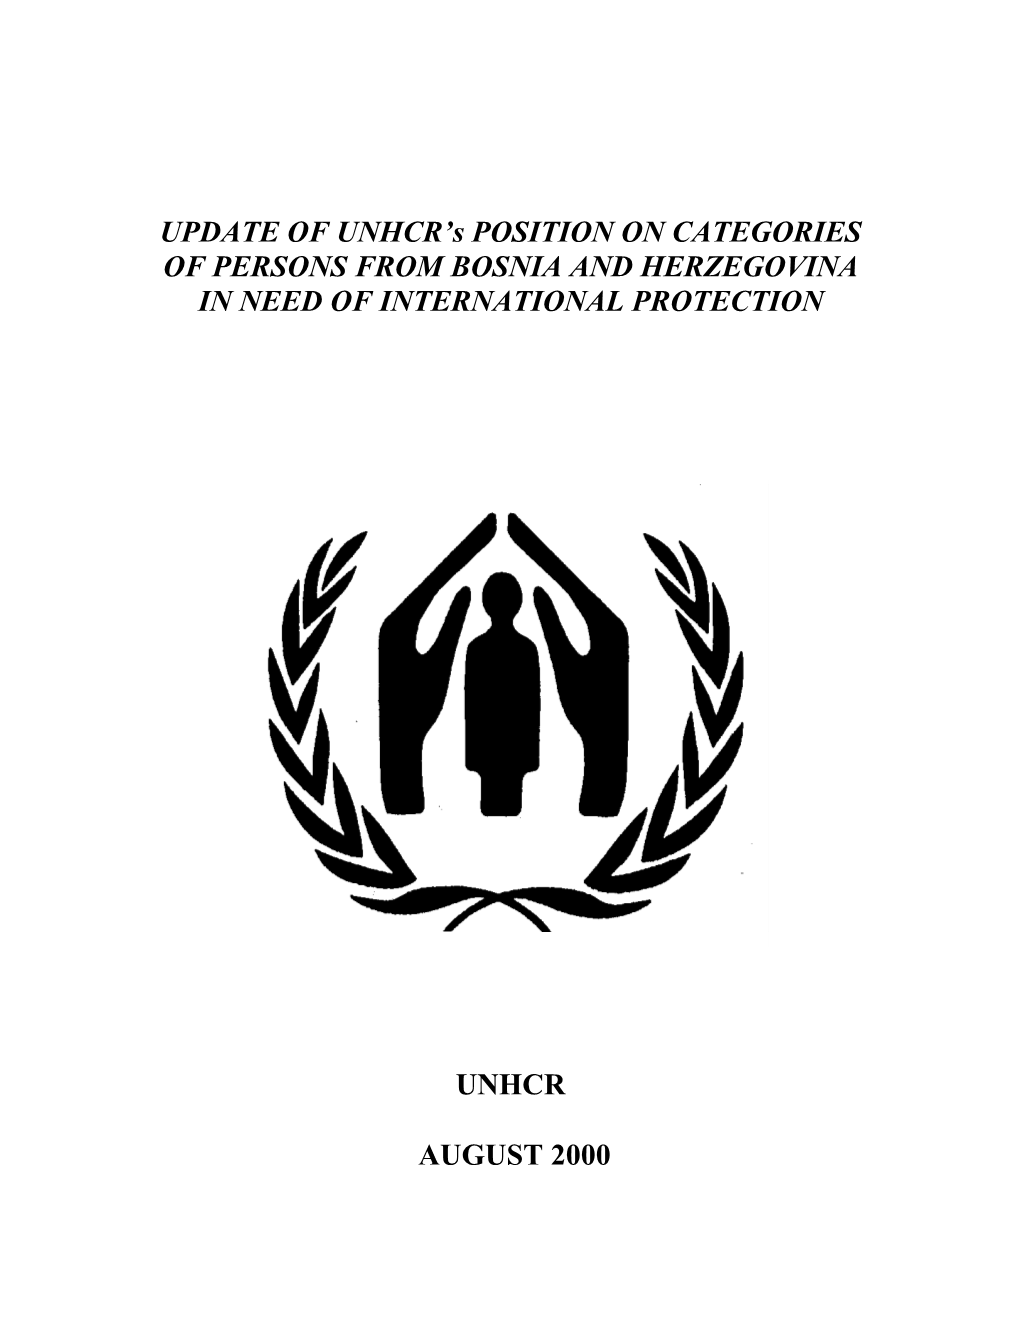 UNHCR's Position on Categories of Persons from Bosnia